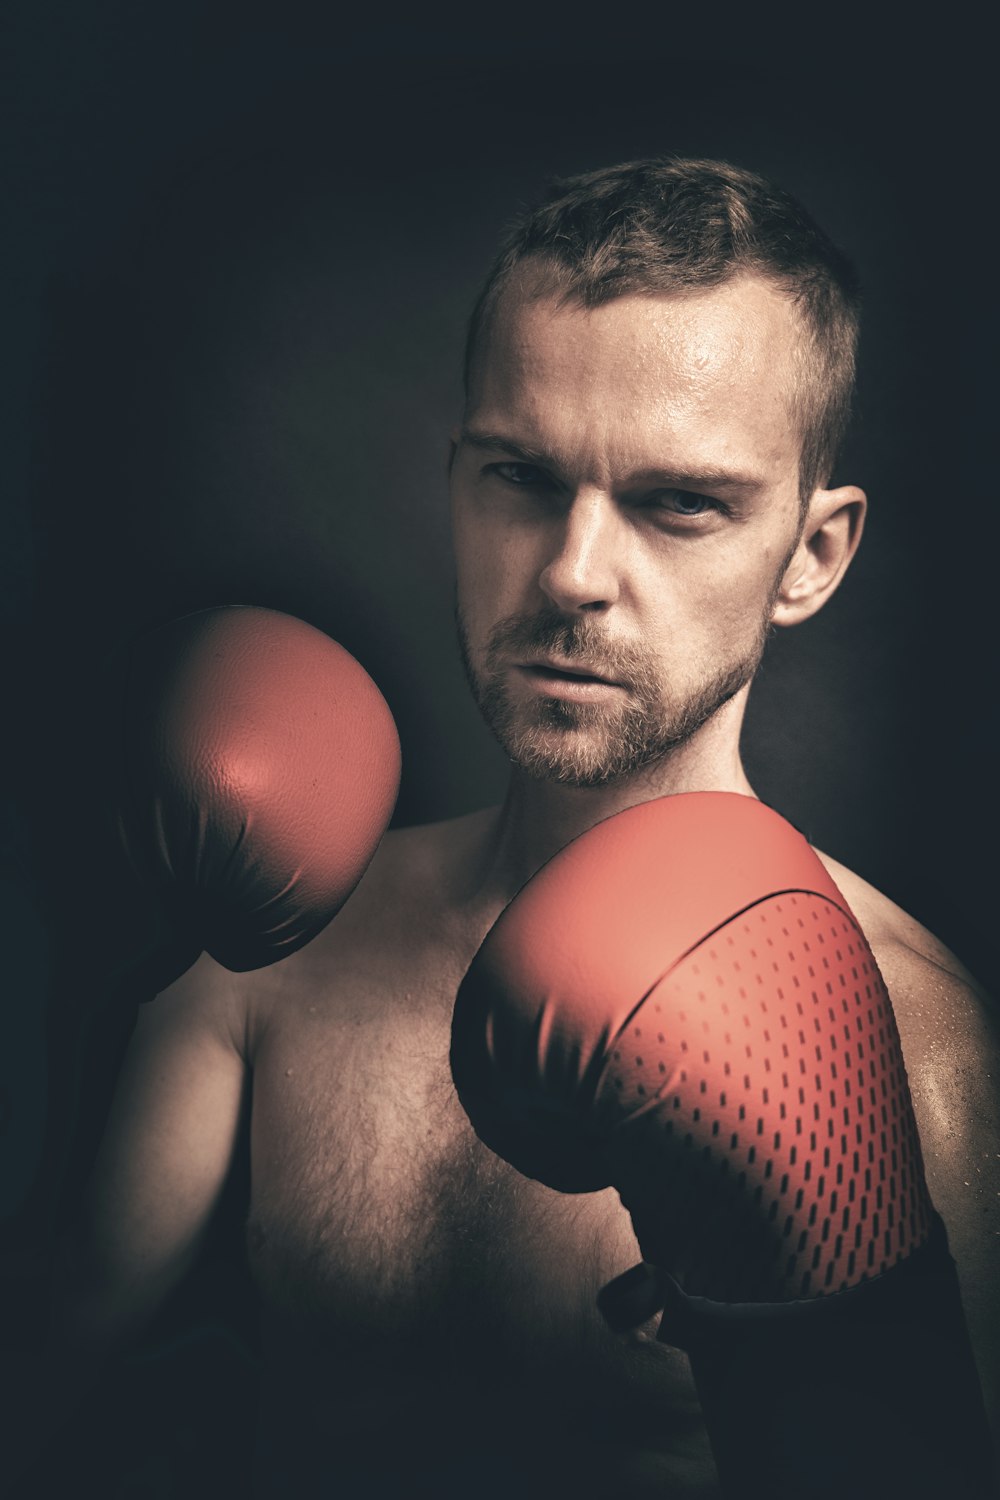 a man wearing boxing gloves posing for a picture